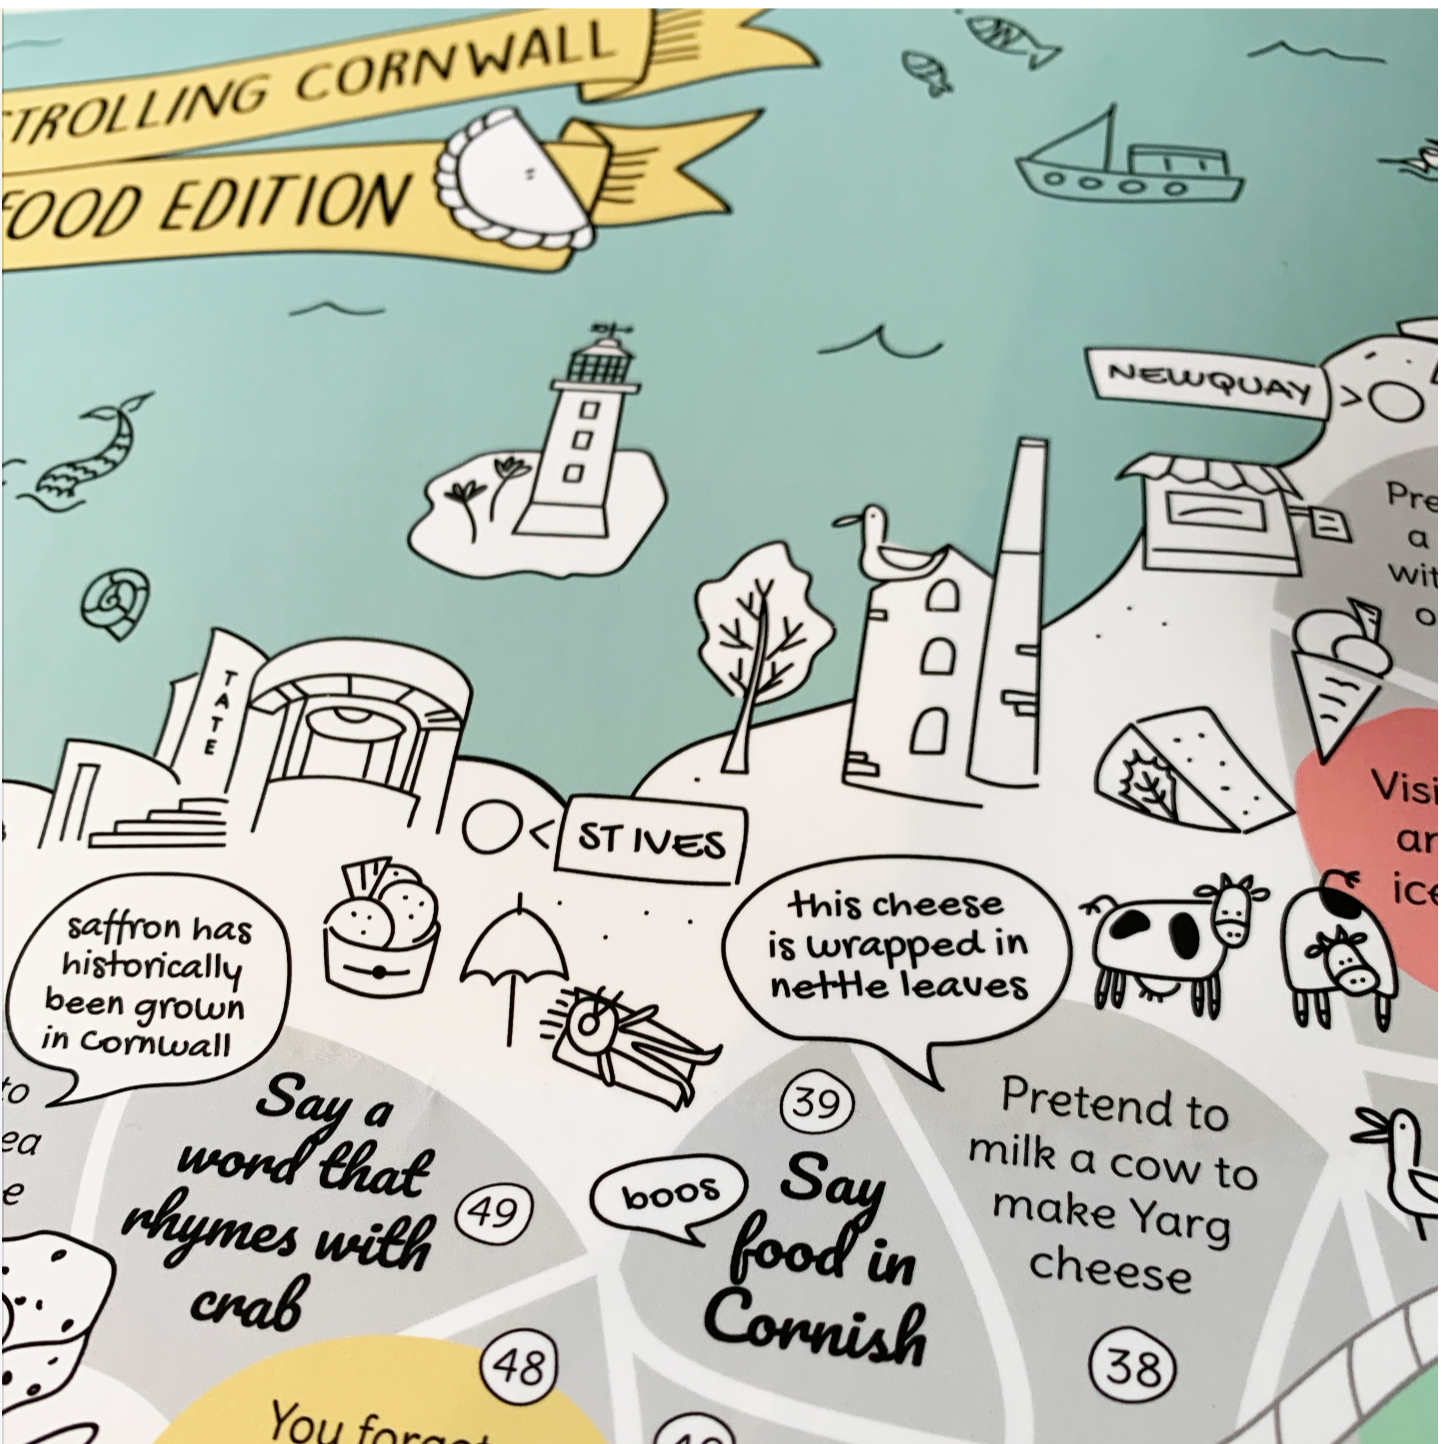 Strolling Cornwall Food Edition, illustration of Tate St Ives and Cornish pasty.